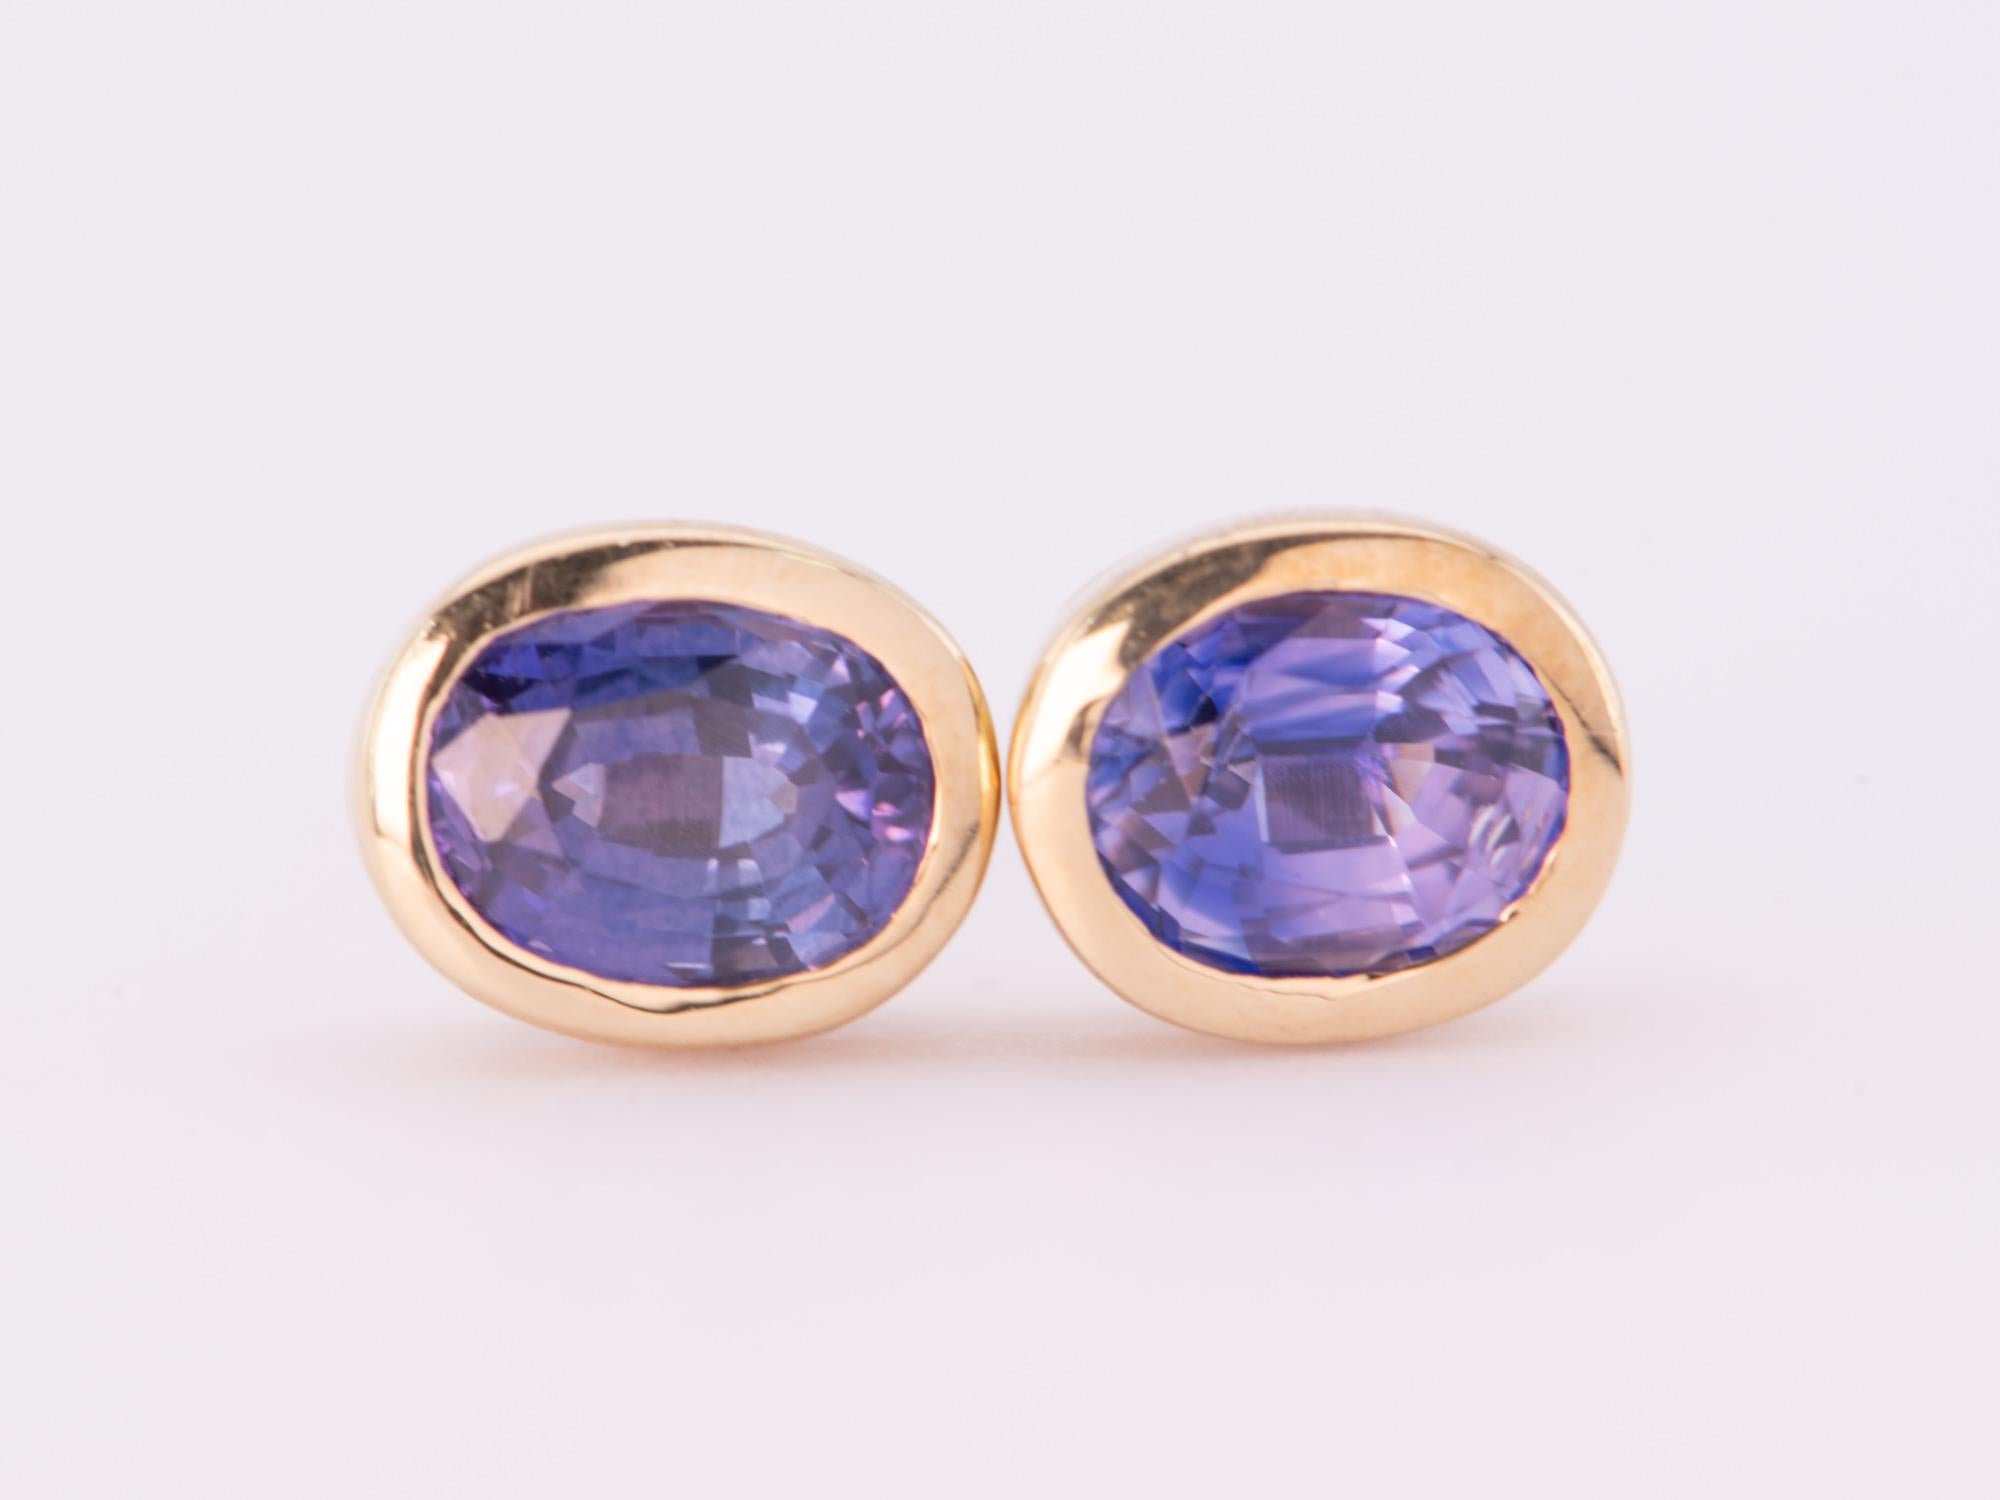 ♥ Purple Bi-Color Sapphire Bezel Set Ear Studs 14K Gold Rainbow Collection
♥ The item measures 6.7mm in length, 5.5mm in width, and 3.5mm in height.

♥ Material: 14K Gold
♥ Gemstone: Sapphire, 1.13ct 
♥ All stone(s) used are genuine, earth-mined,